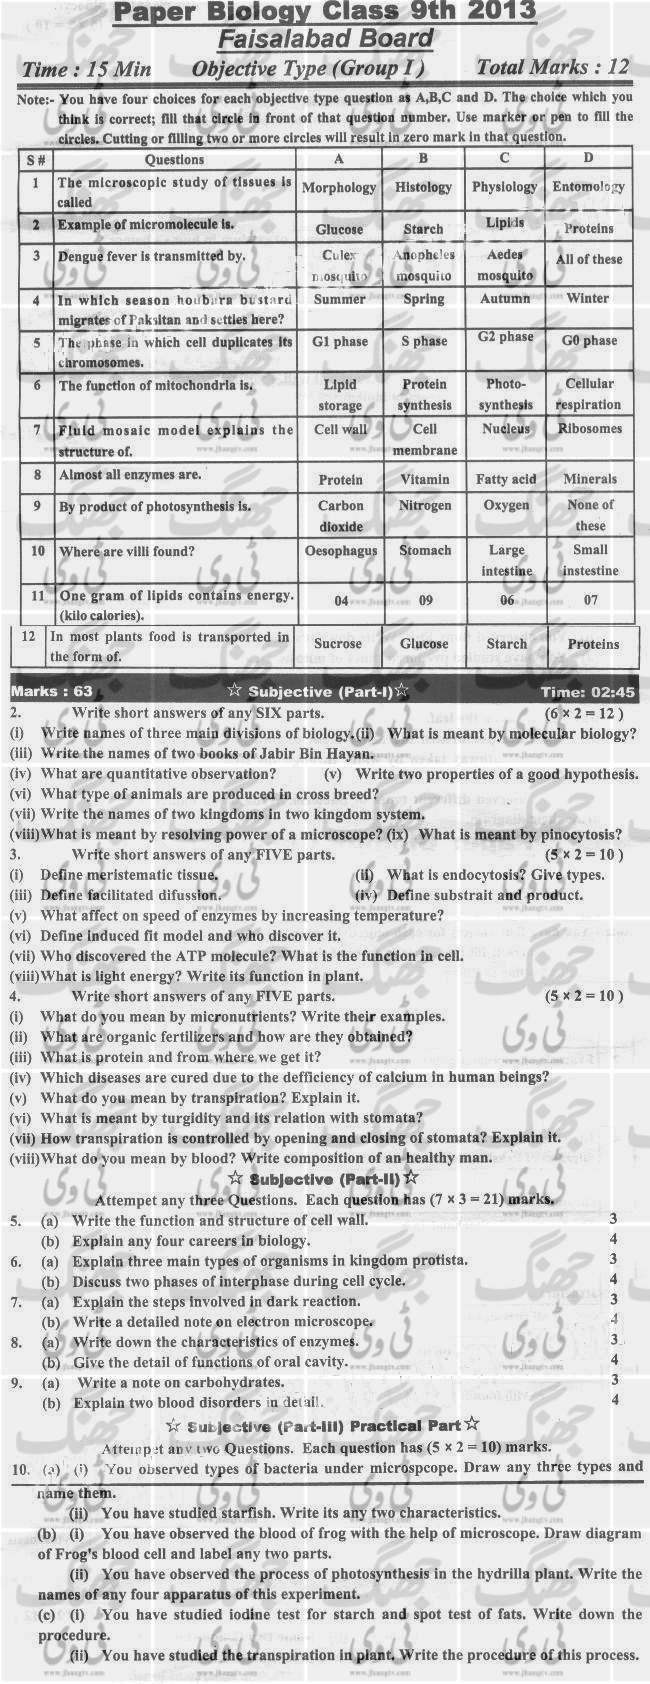 Past-Papers-2013-Faisalabad-Board-9th-Class-Biology-Group-1-English-Version copy